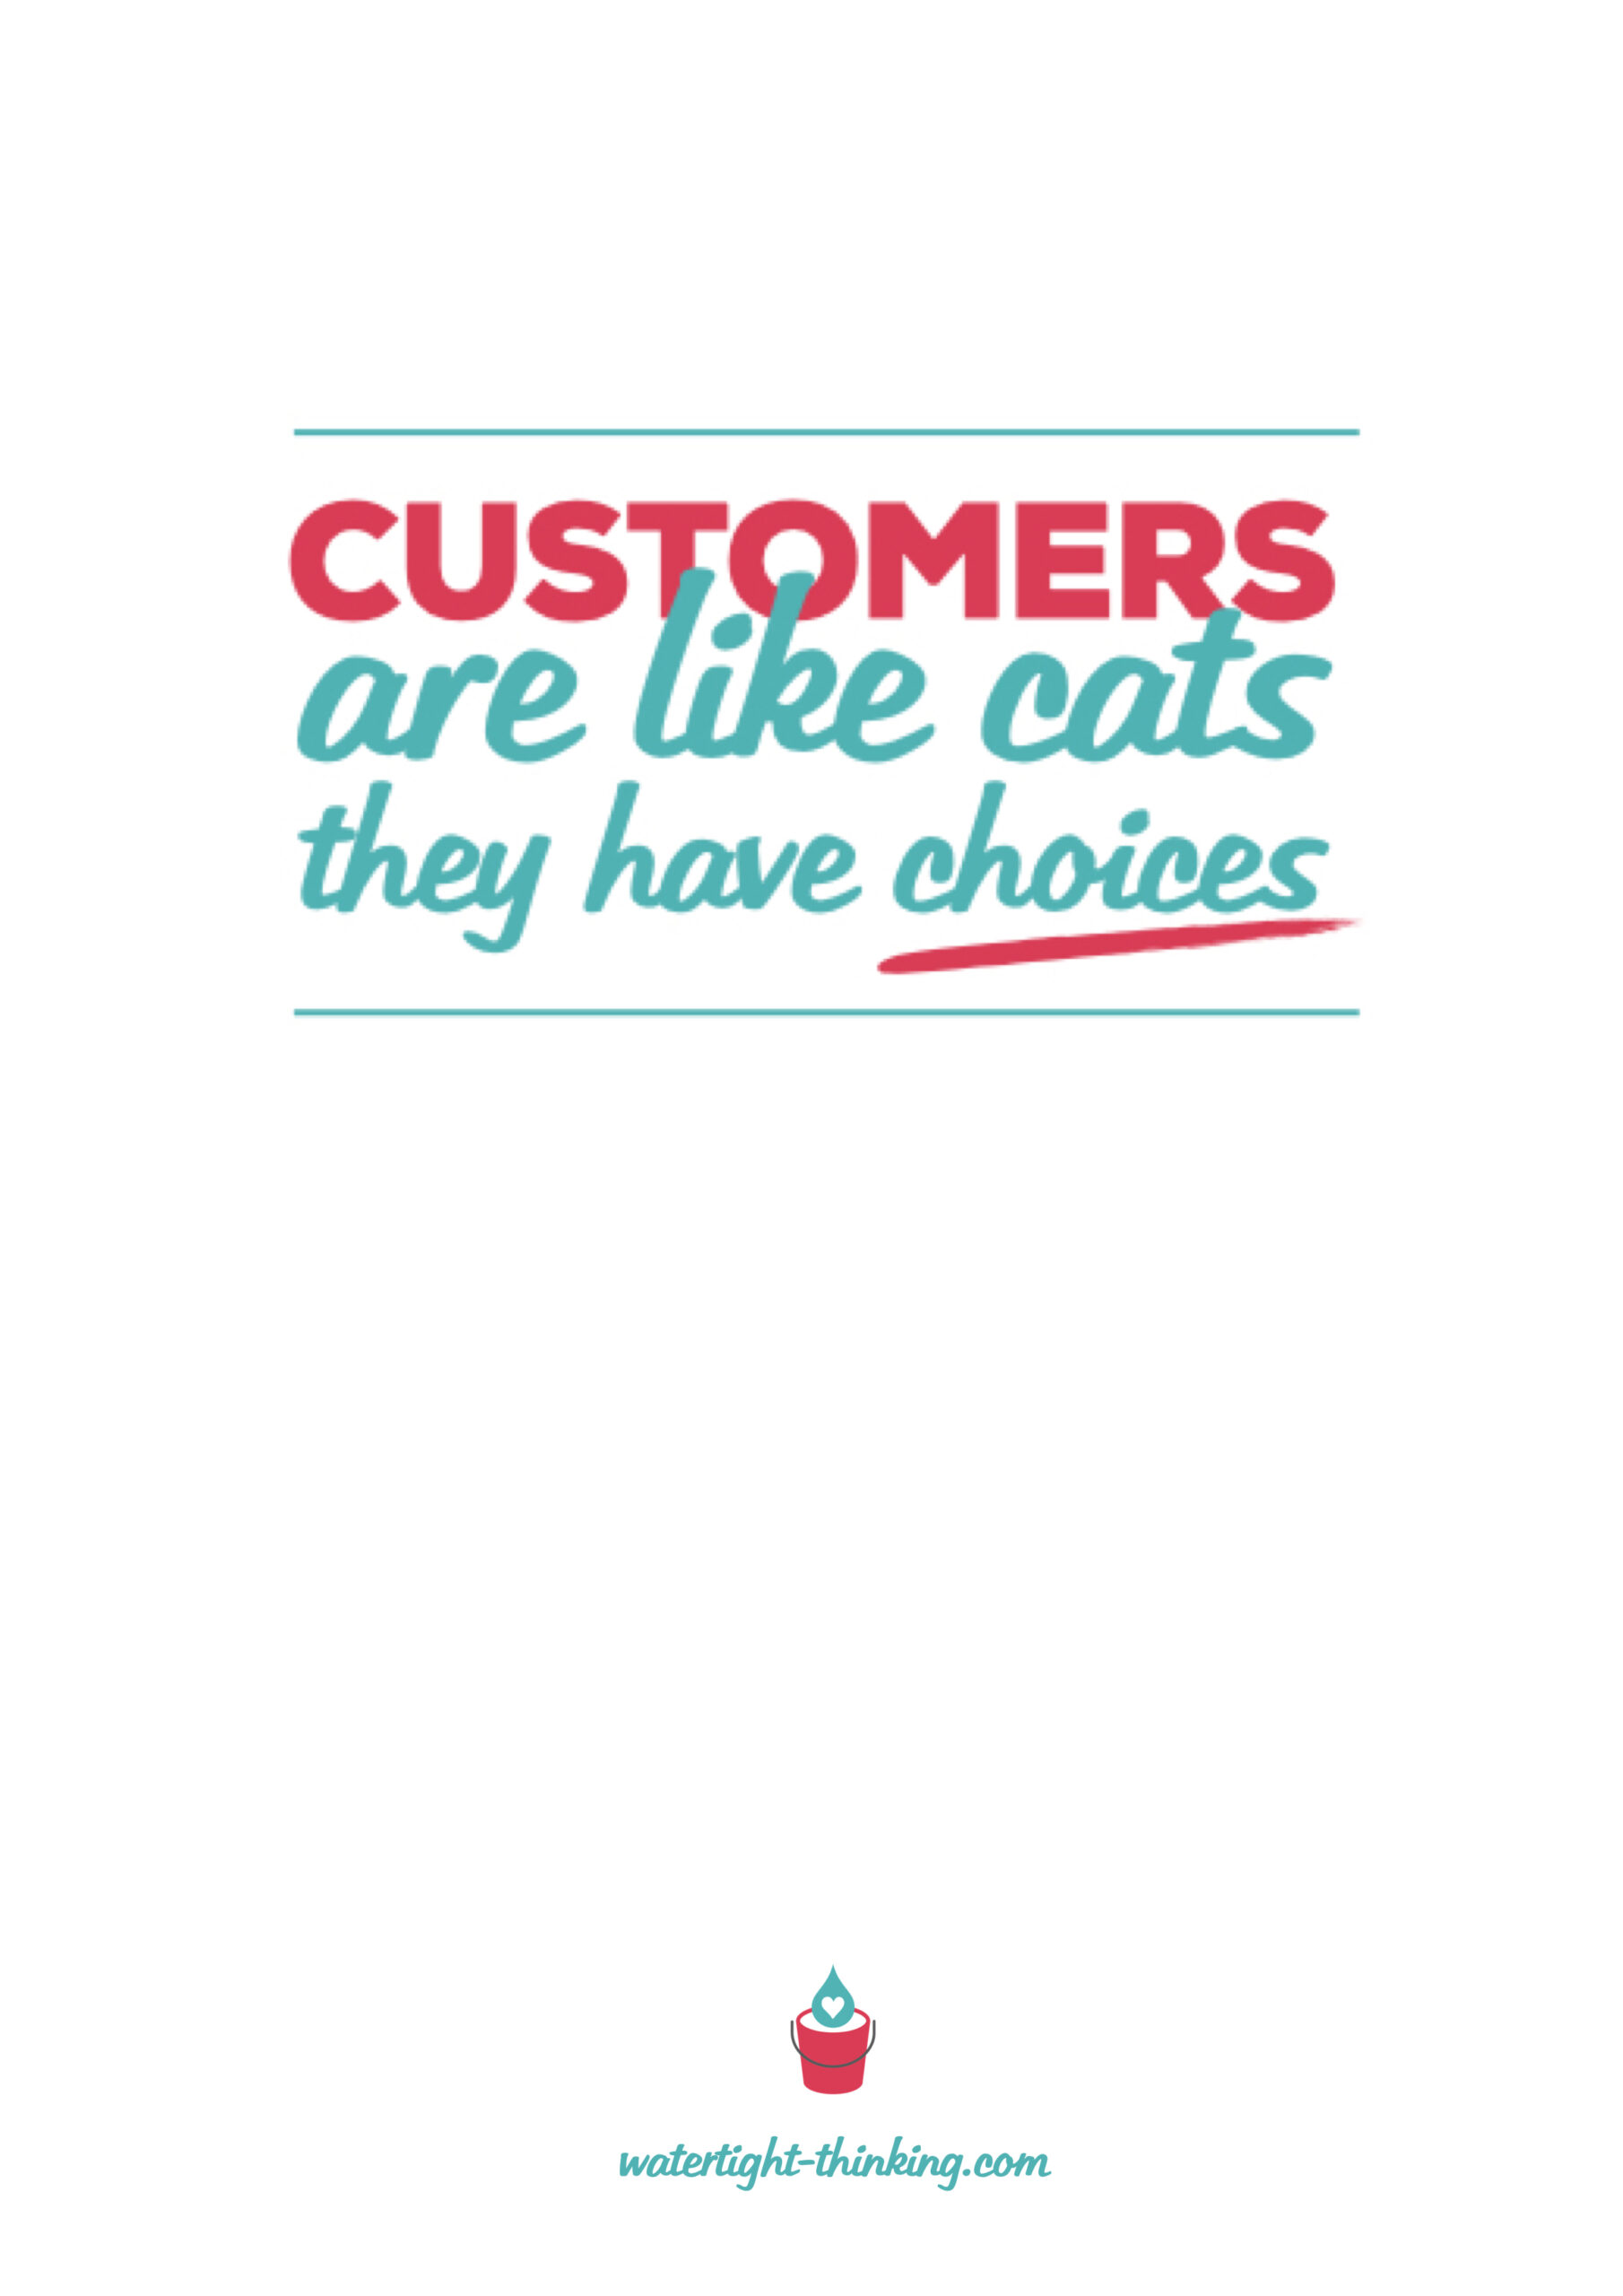 "Customer are like cats, they have choices."